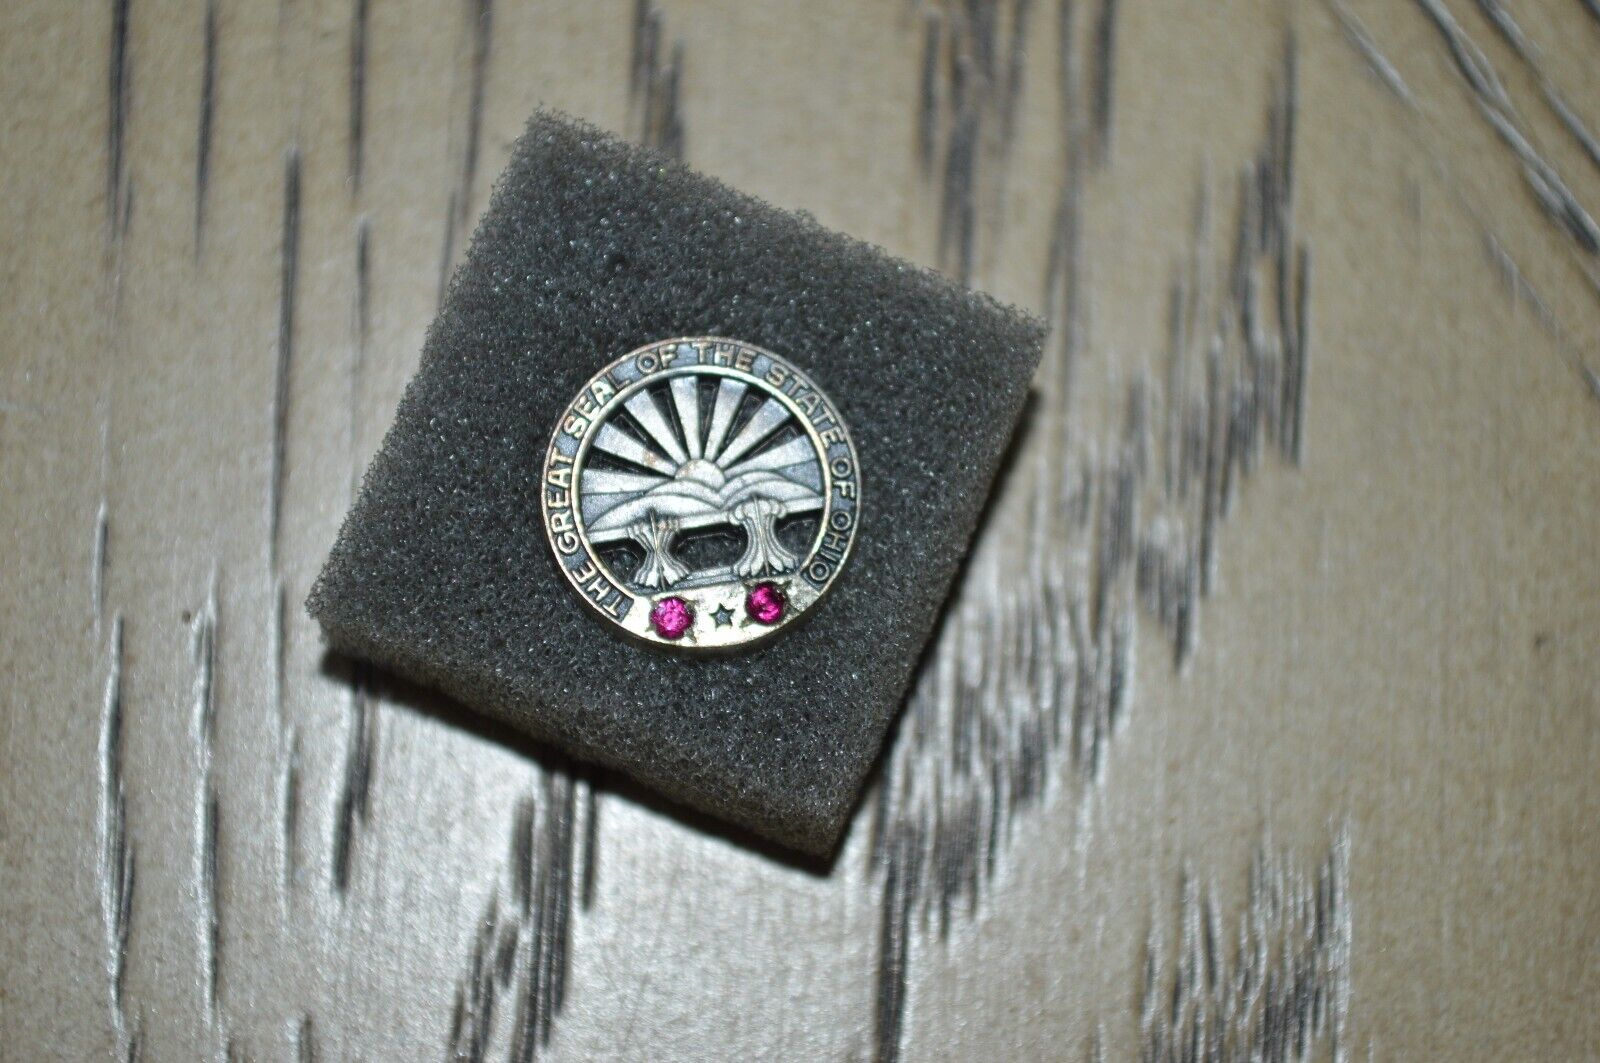 The Great Seal State of Ohio Sterling Silver Double Red Stone Vintage Lapel Pin